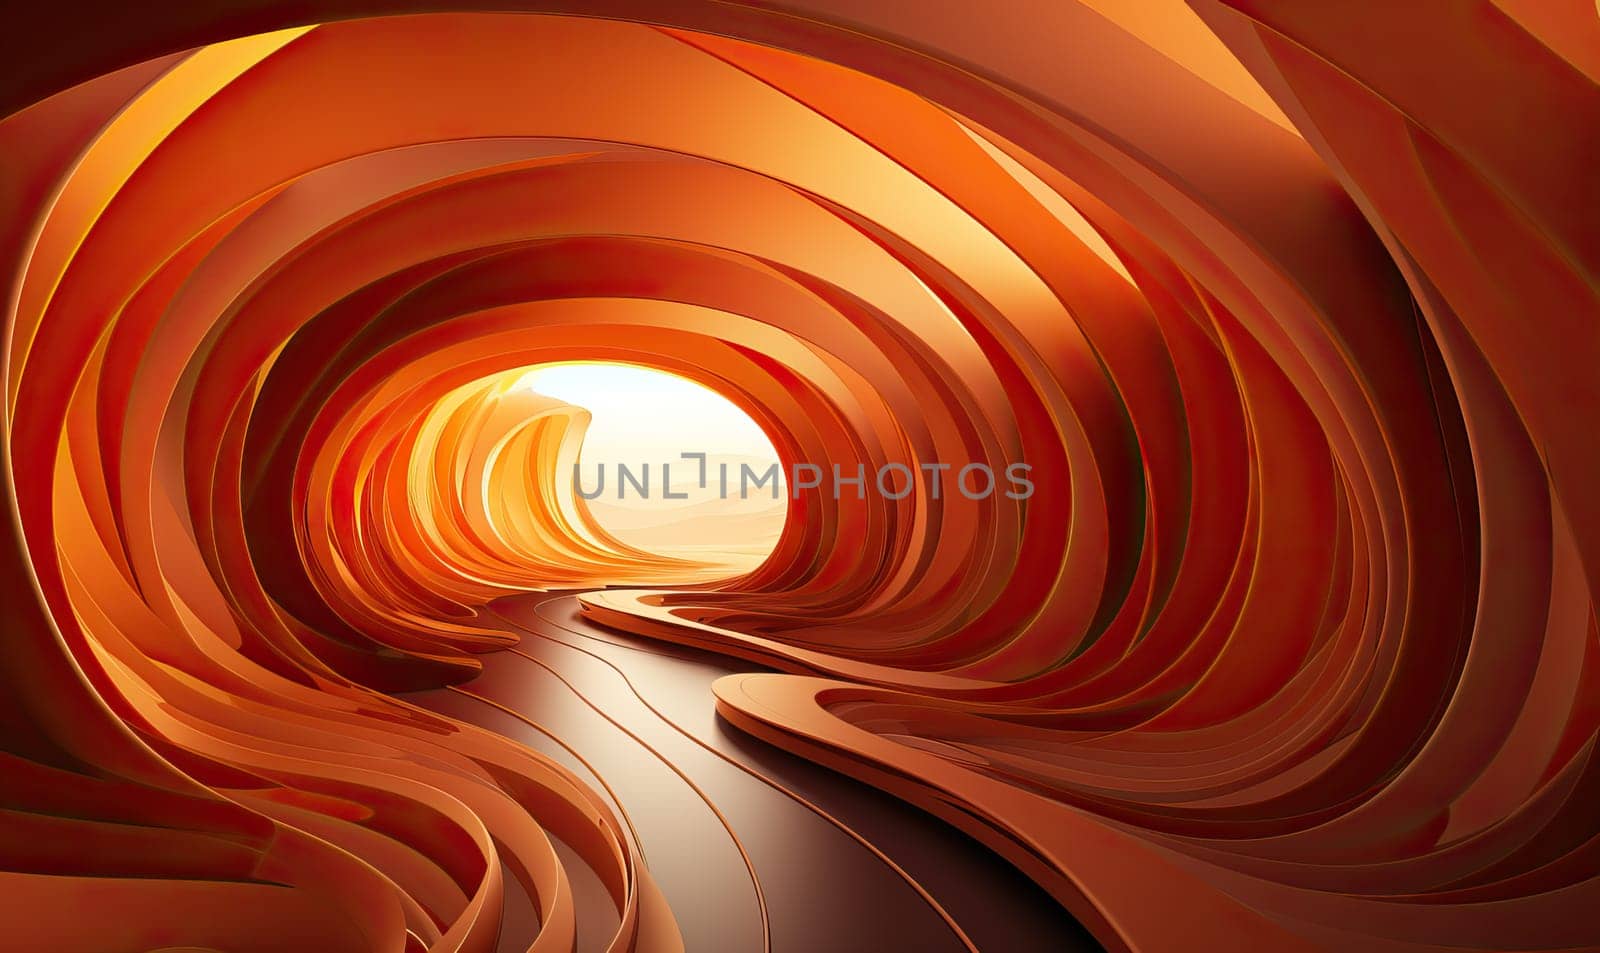 Creative of shiny elegant colorful and luxury wave elements with shiny lines on abstract background.